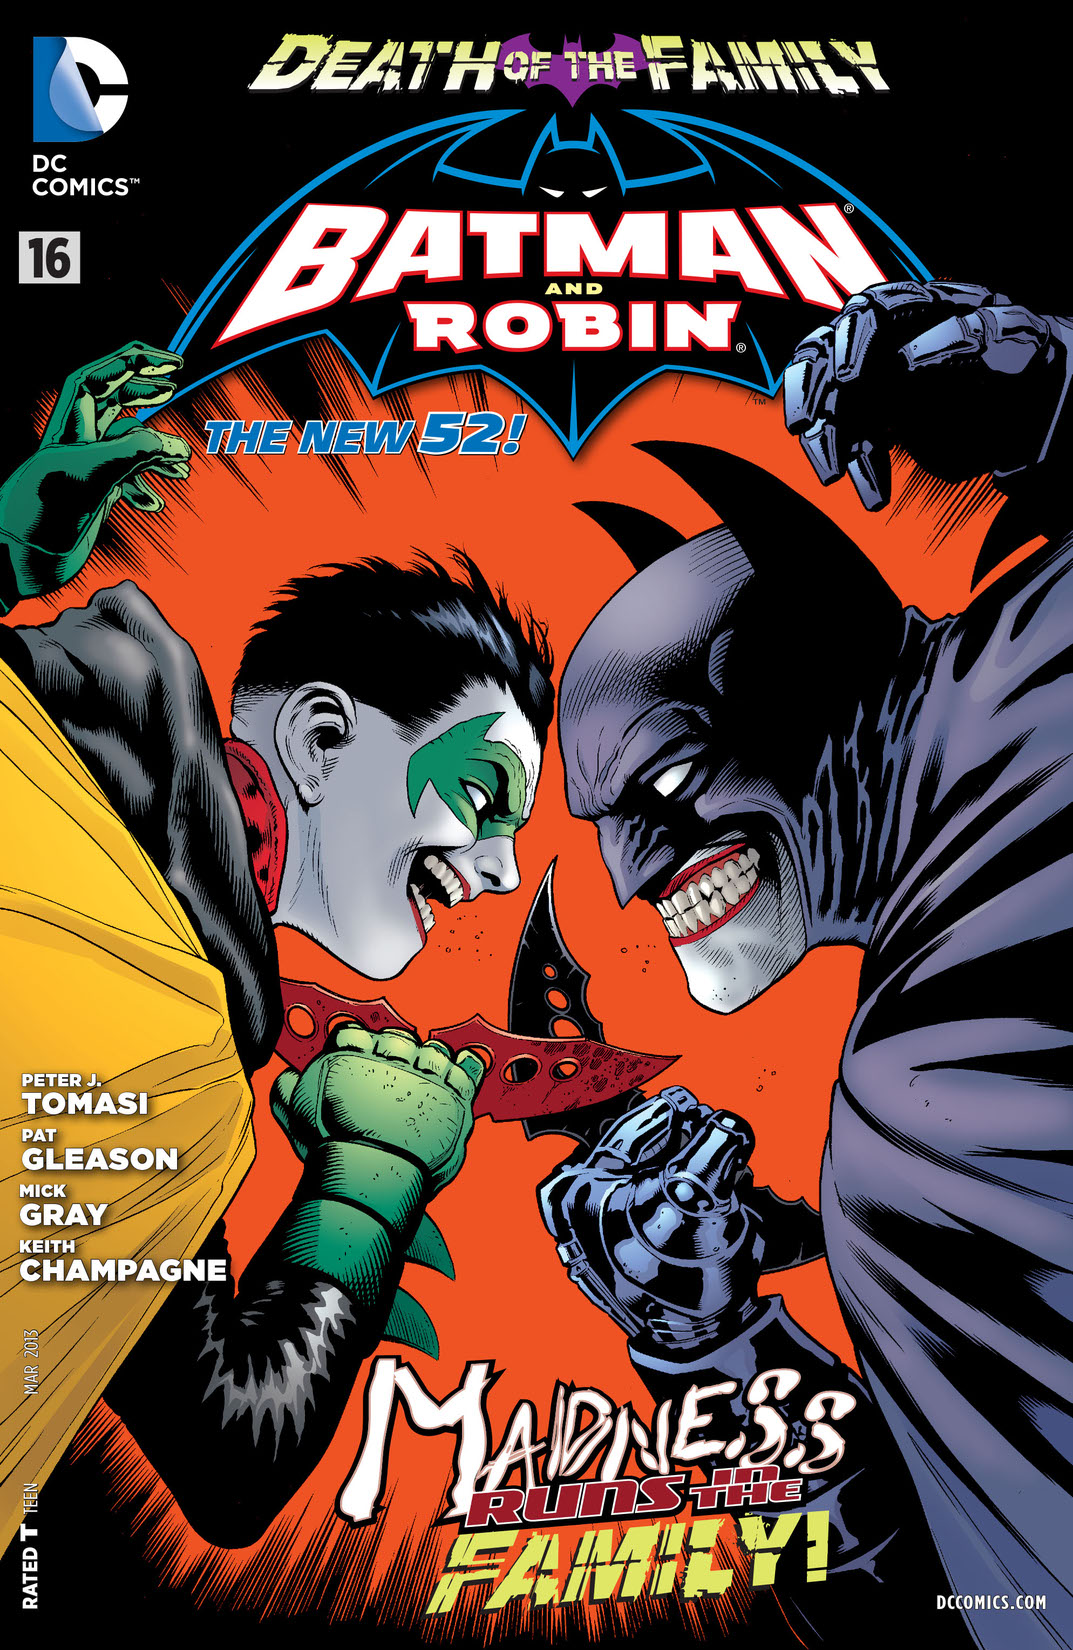 Batman and Robin (2011-) #16 preview images